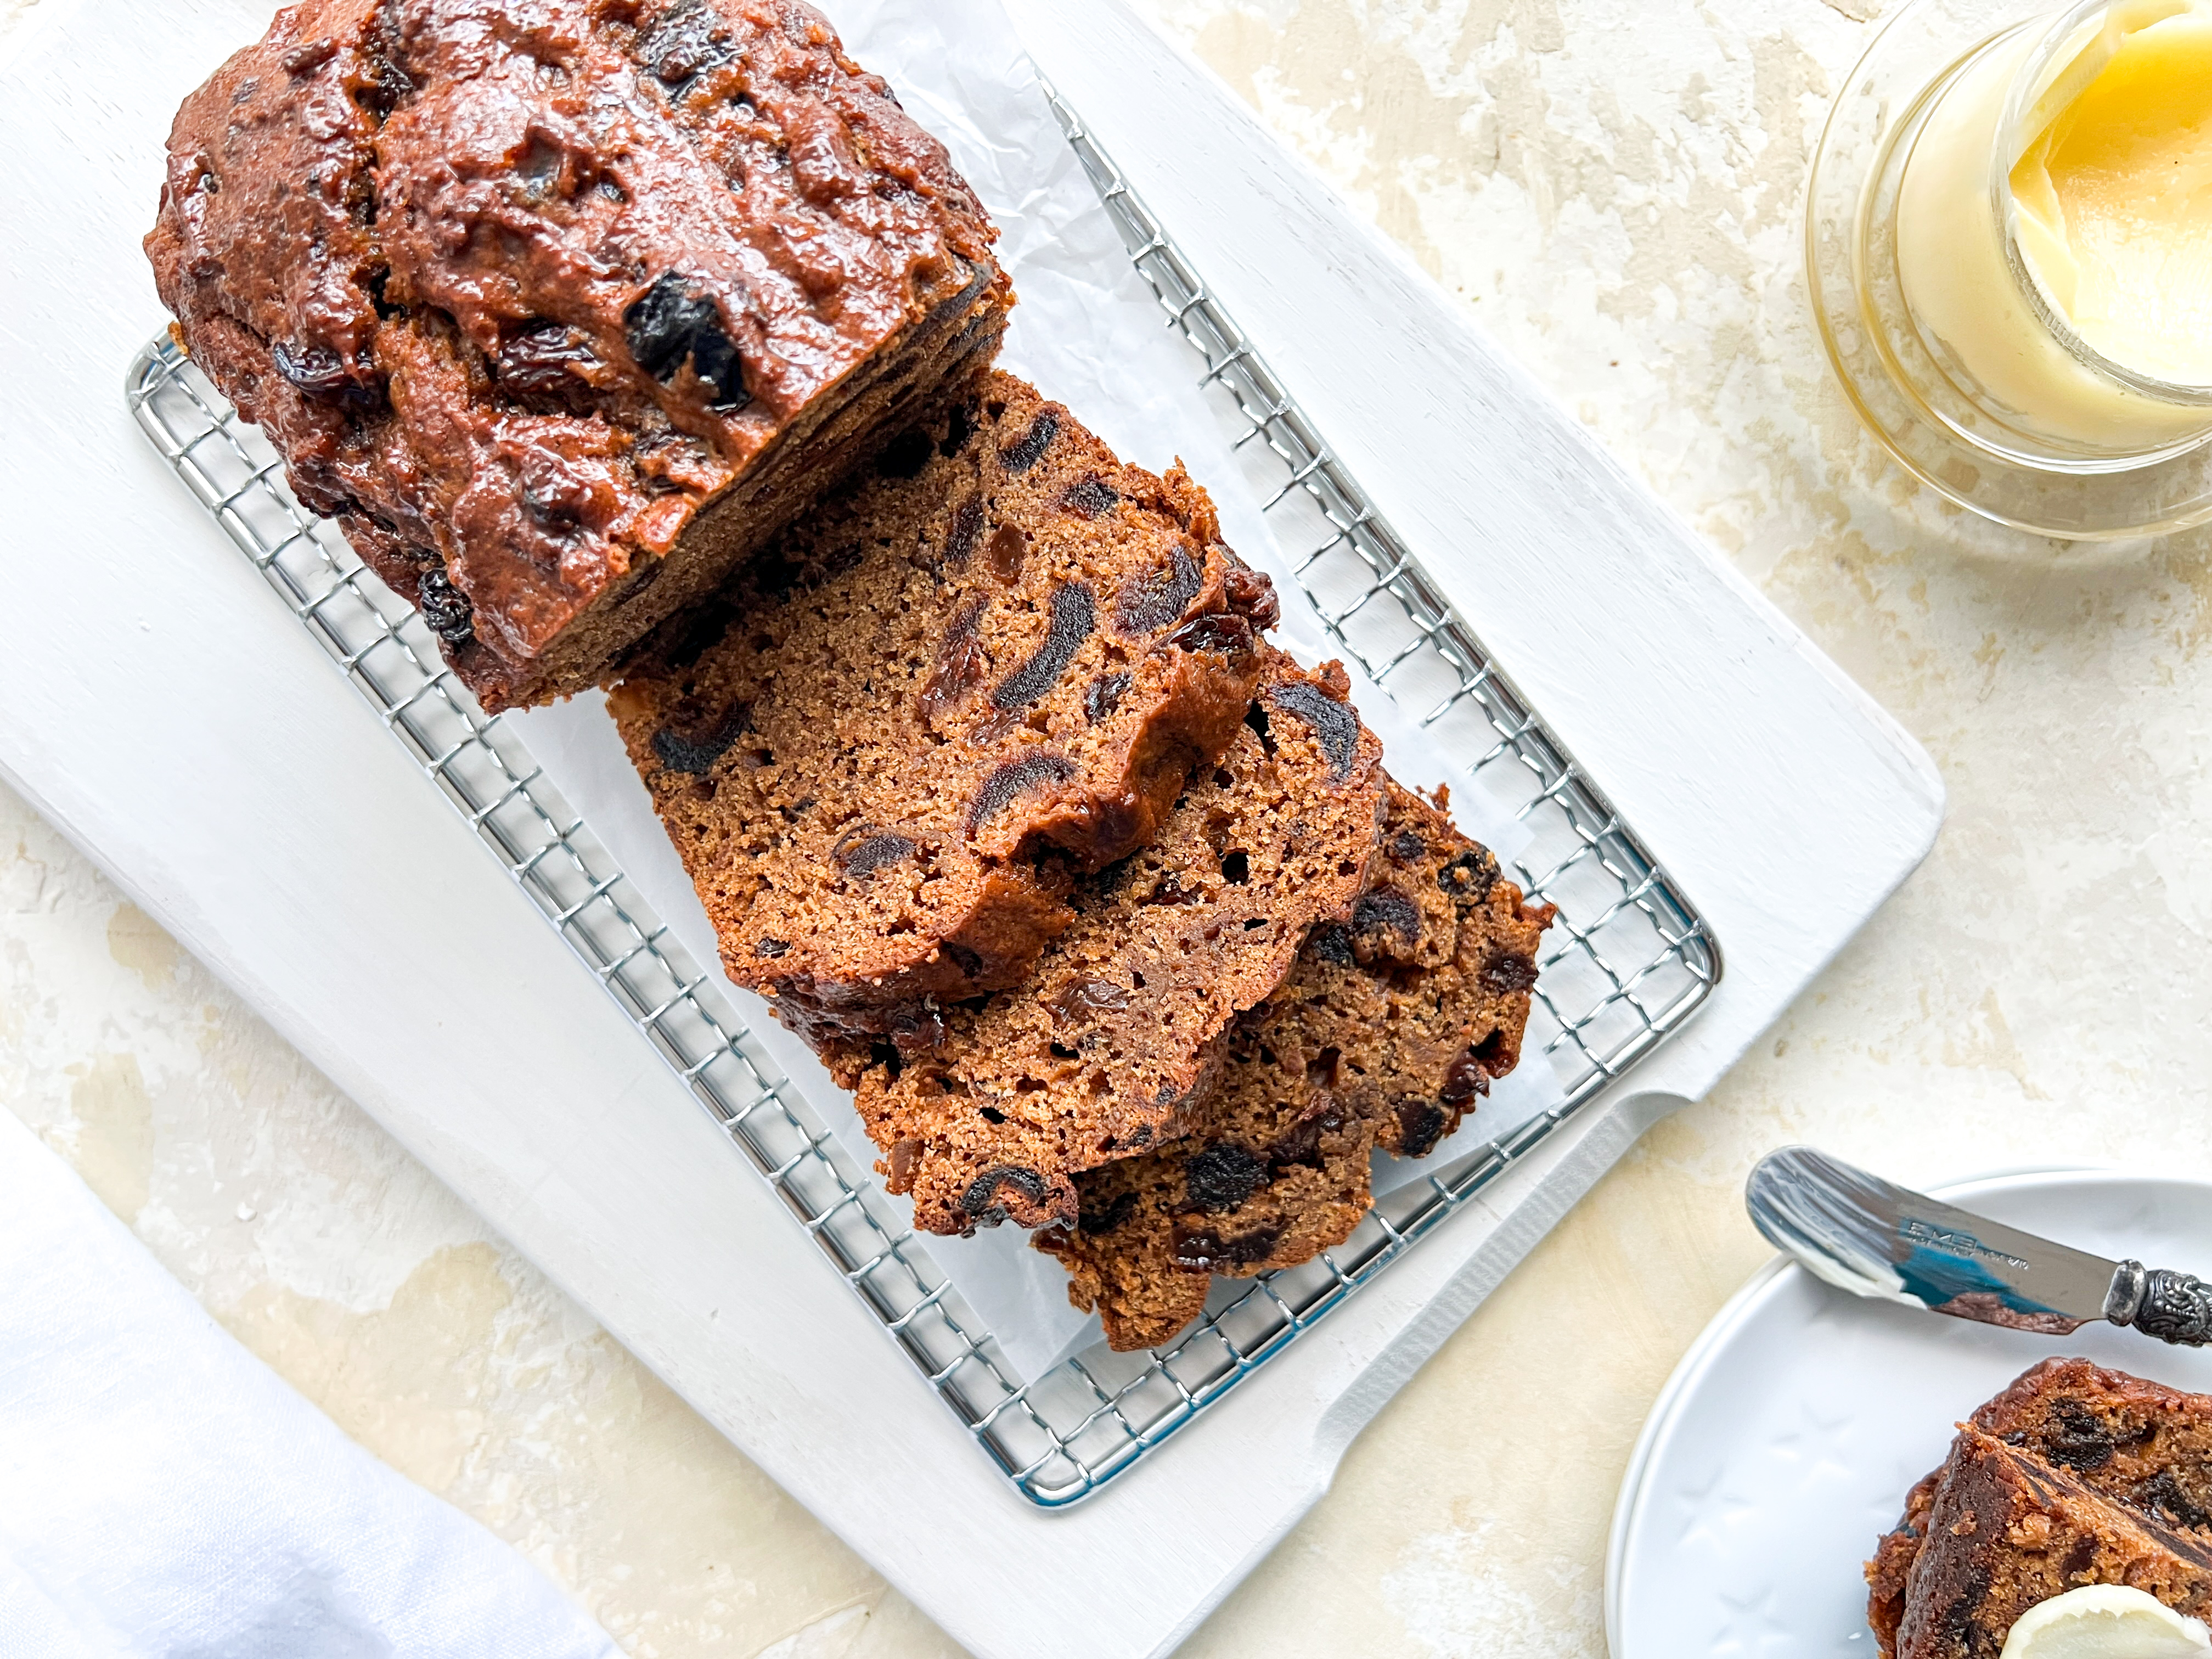 Photograph of Sticky Date Cake with Brown Butter and Condensed Milk